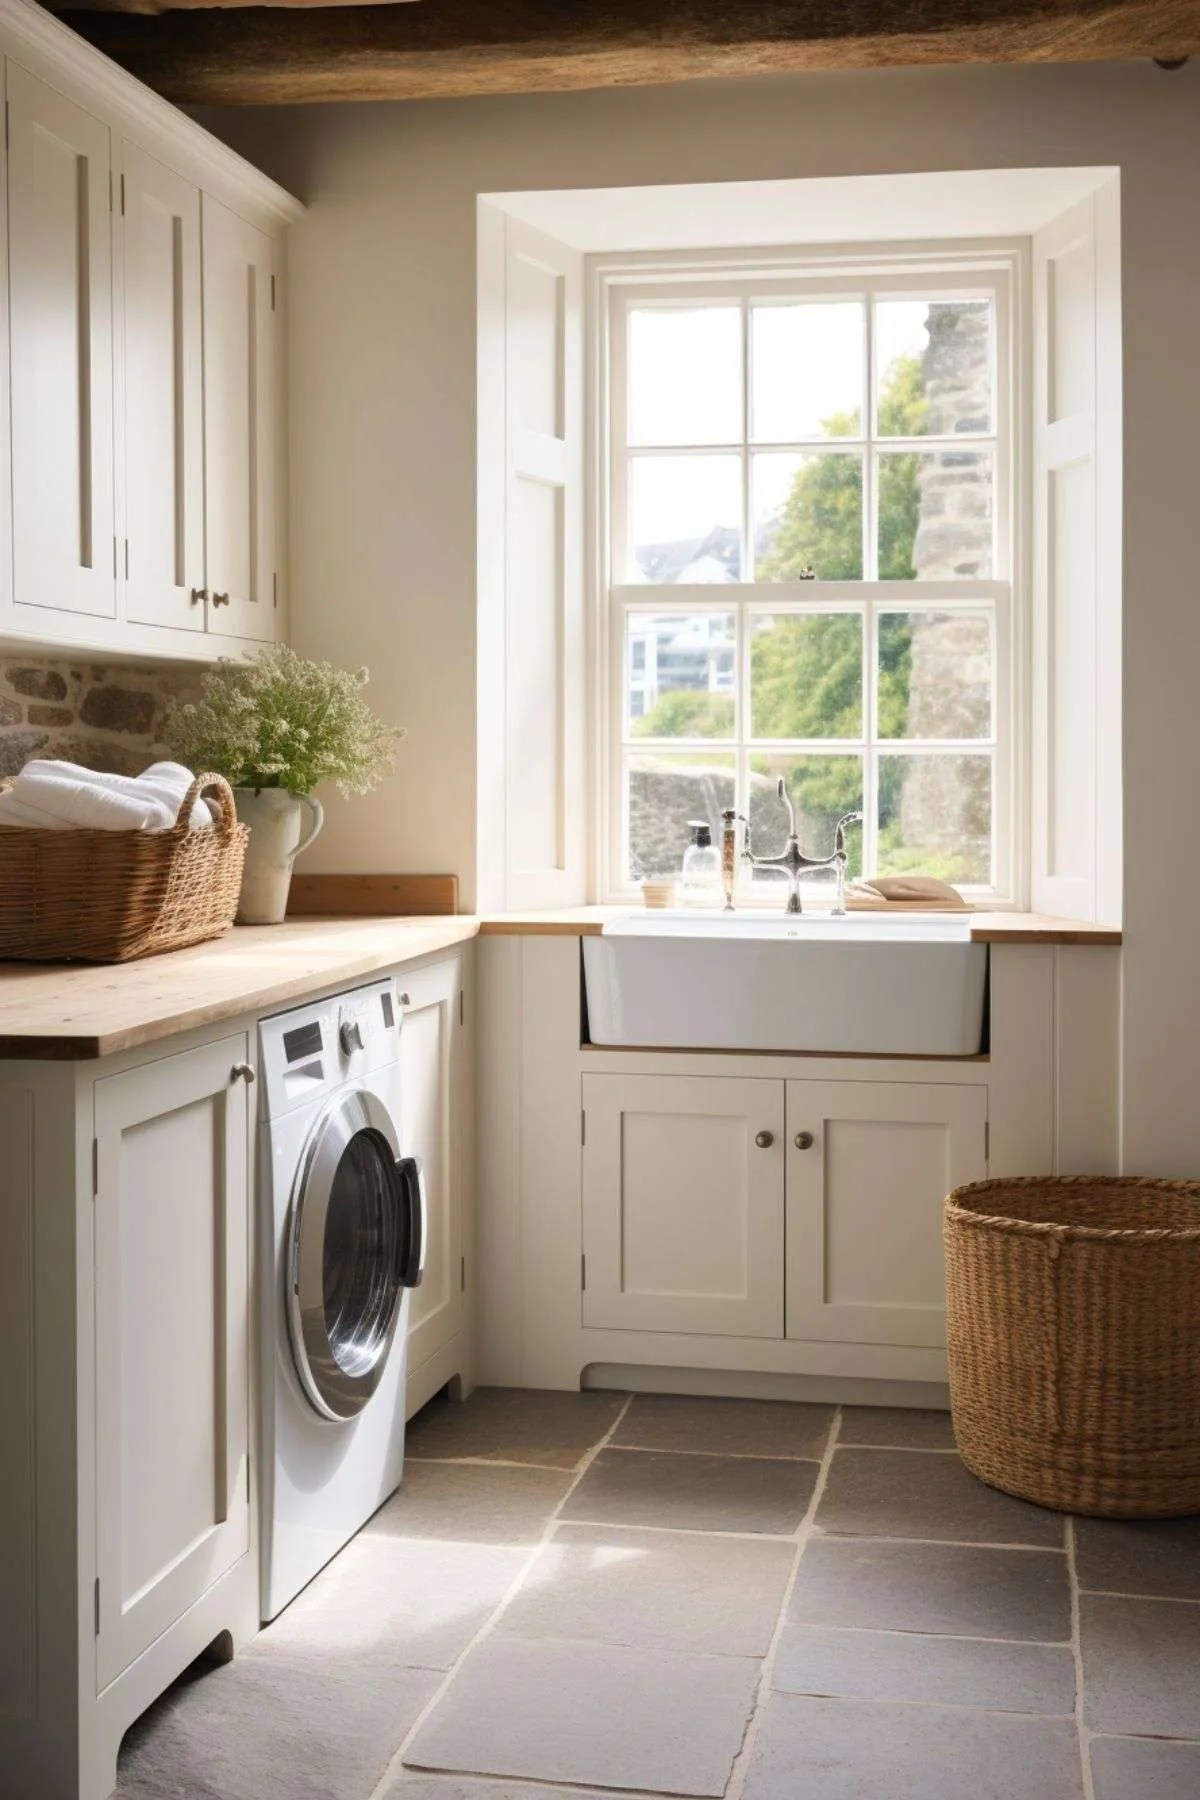 5 Tips on How to Improve Your Laundry Room Design